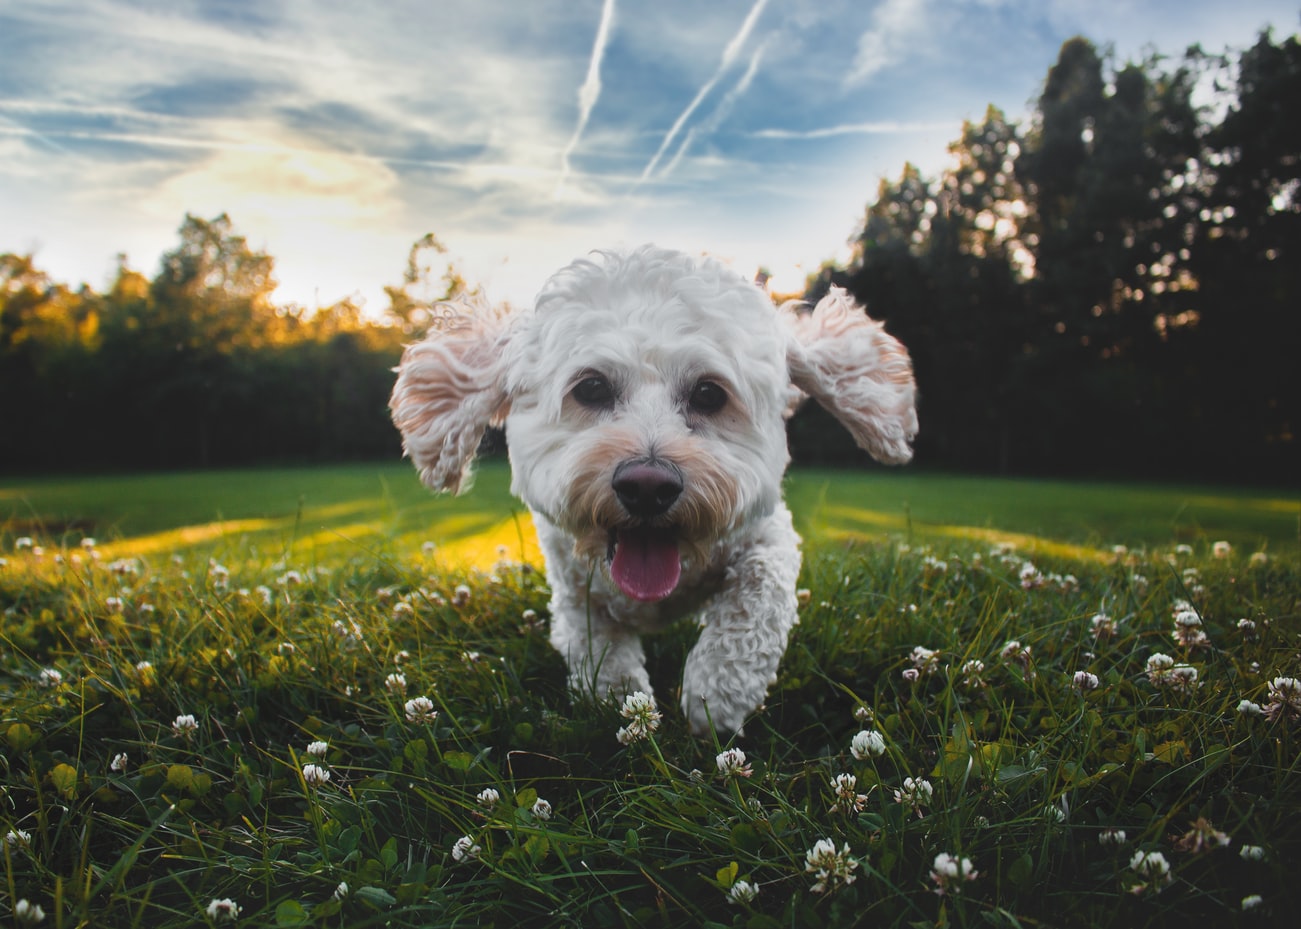 Happy dog running through filed at sunset with ears flapping and tongue out